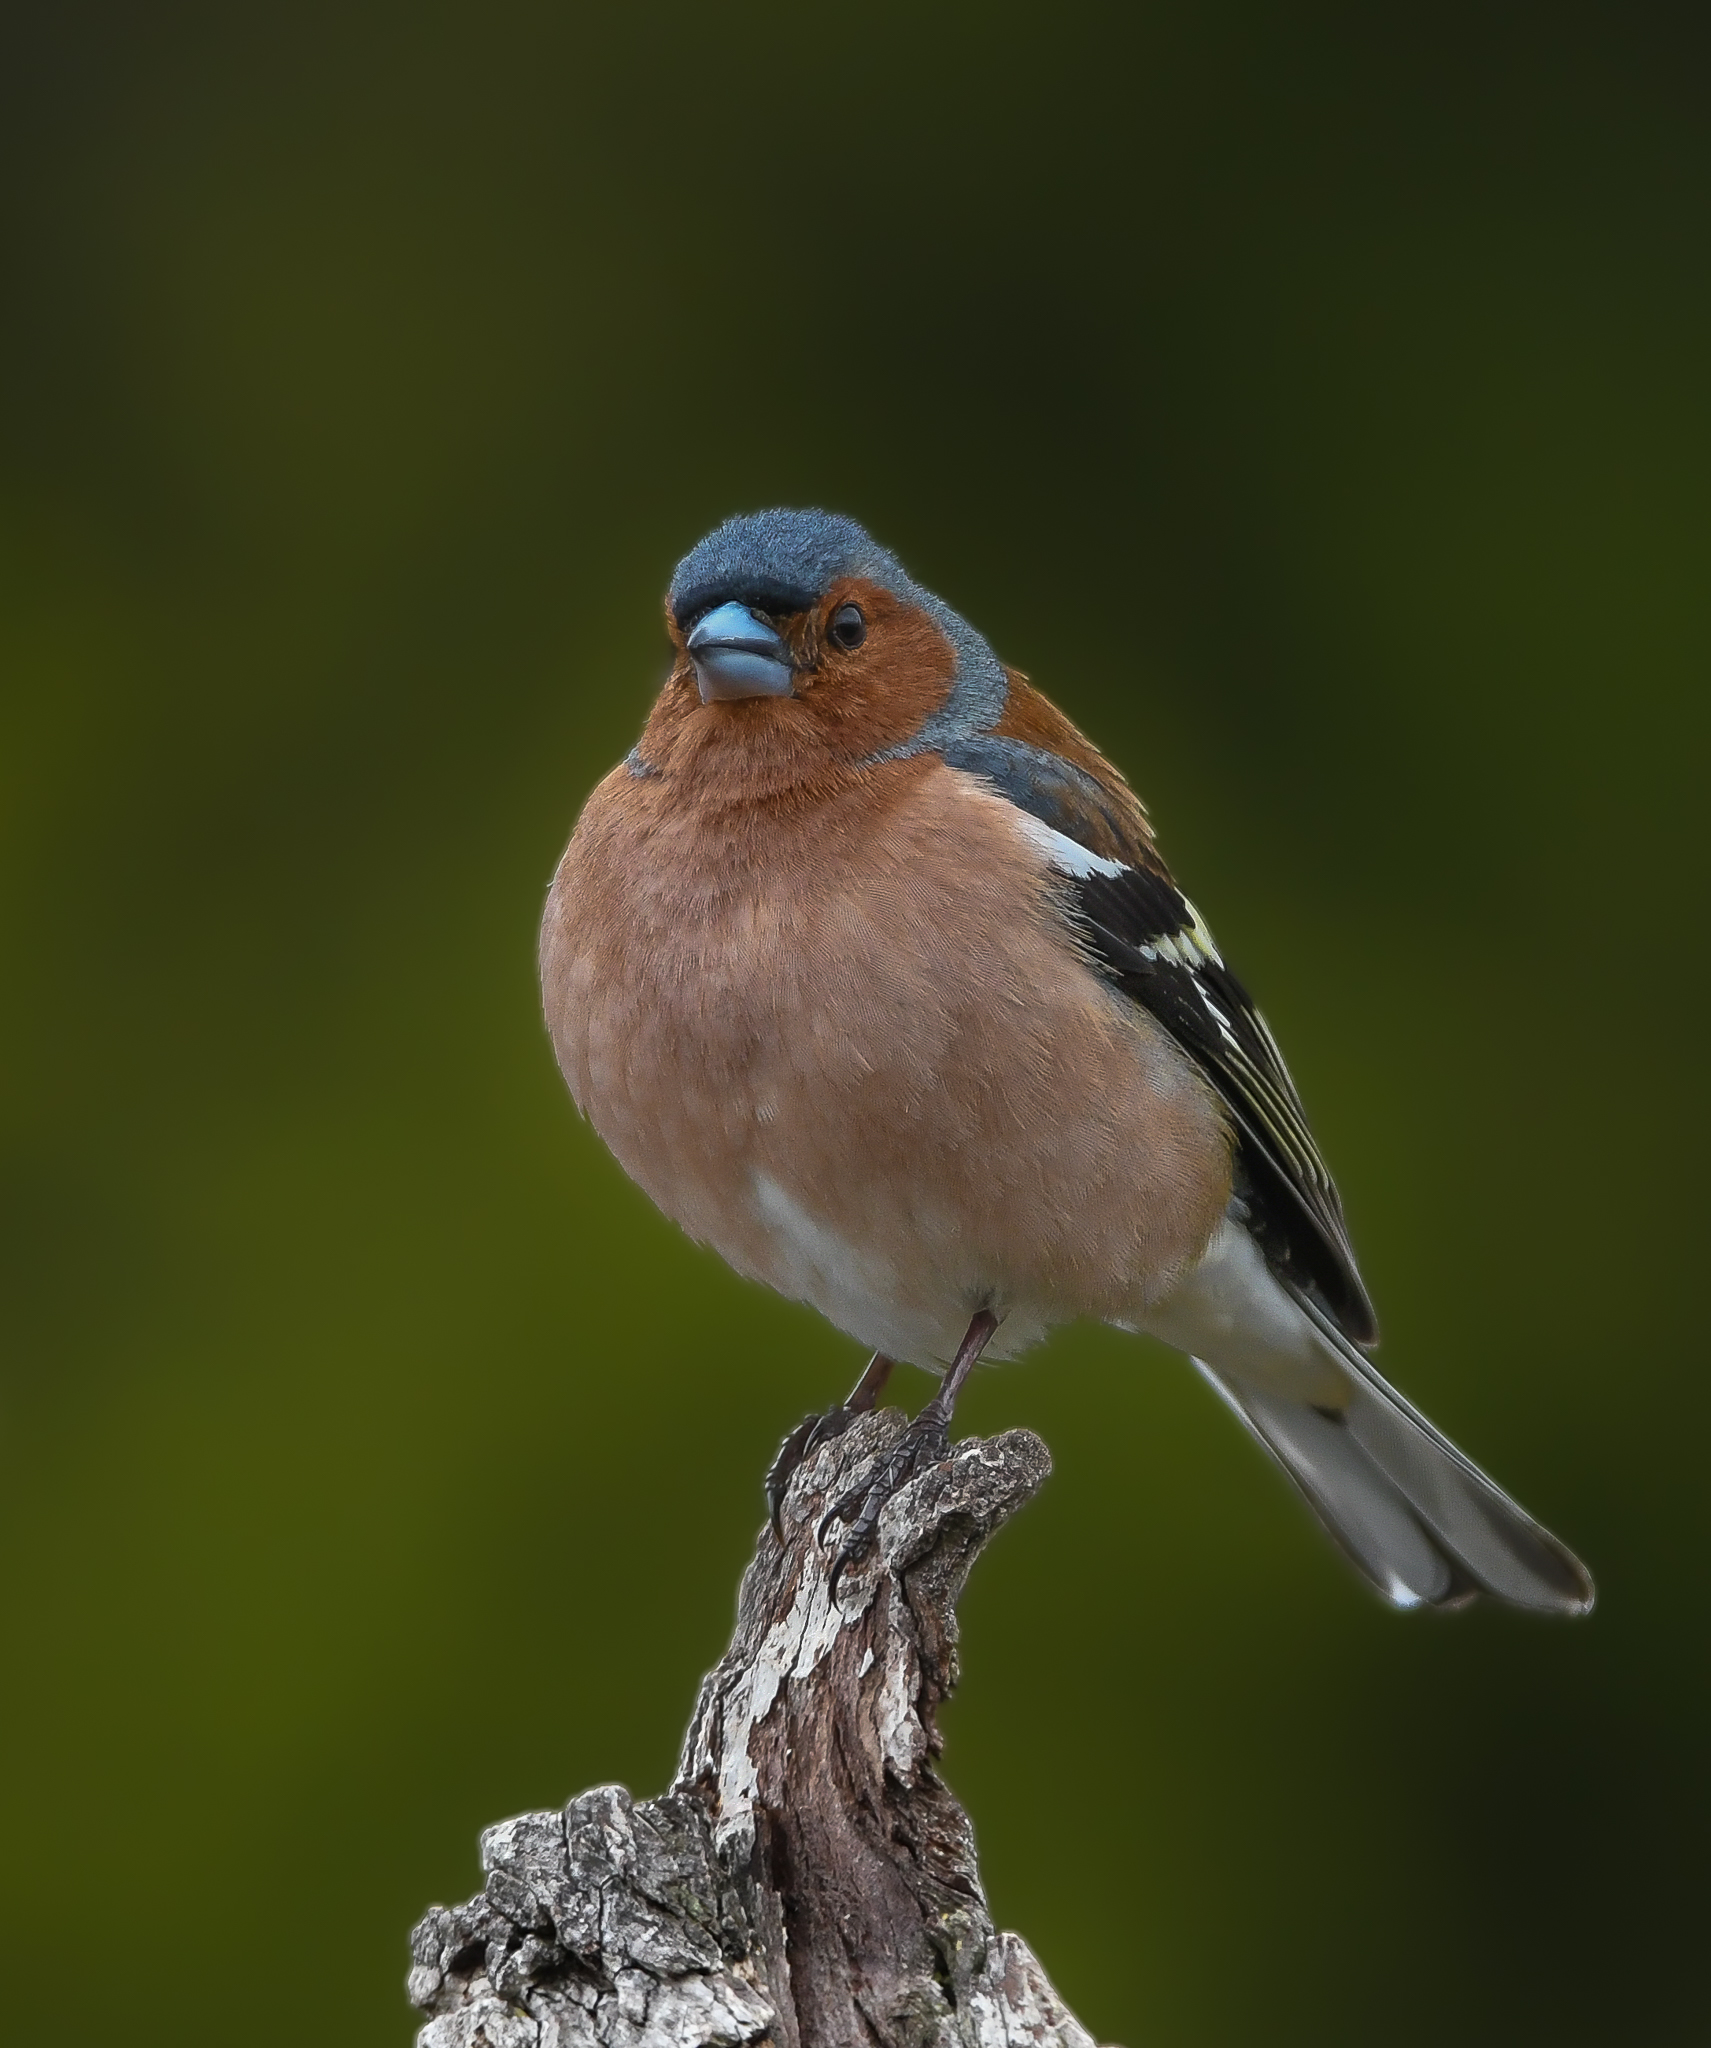 After the holidays I go on a diet, Chaffinch...